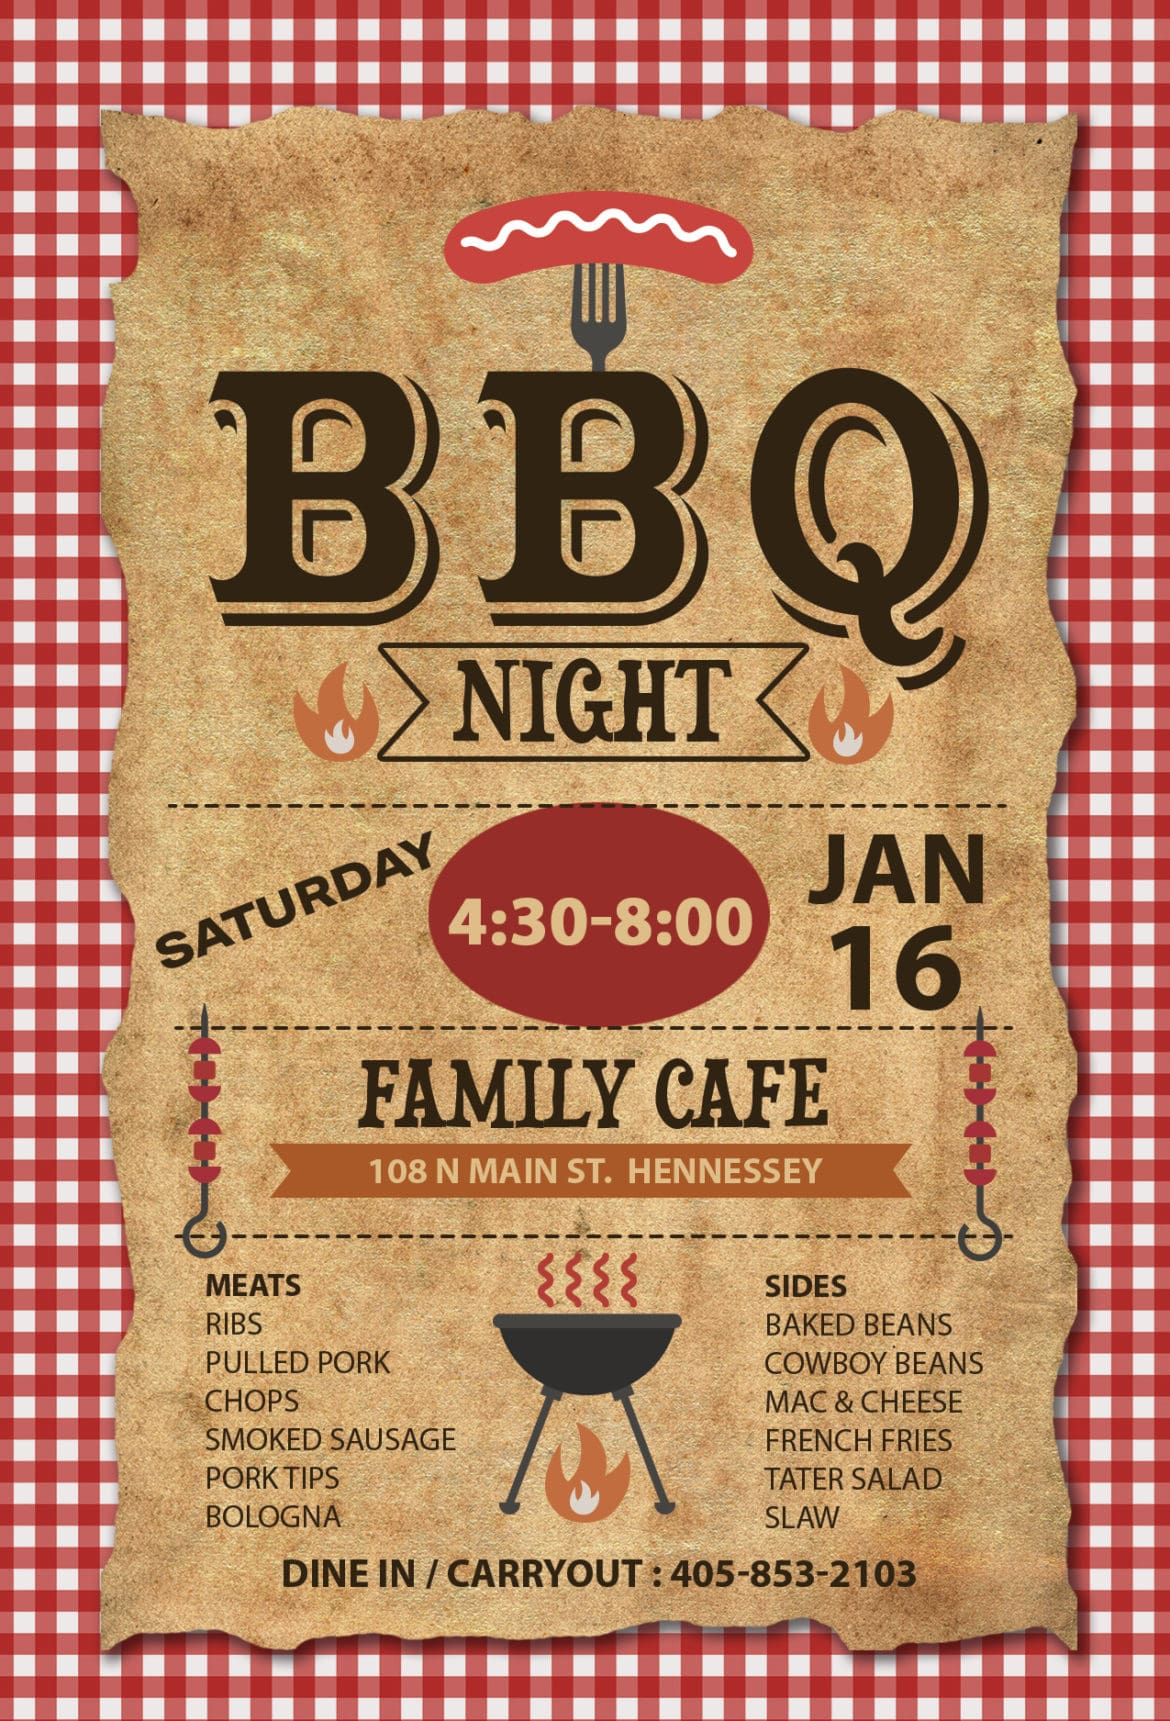 MARK YOUR CALENDARS FOR SOMETHING YUMMY! FAMILY CAFE BBQ NIGHT SATURDAY, JANUARY 16